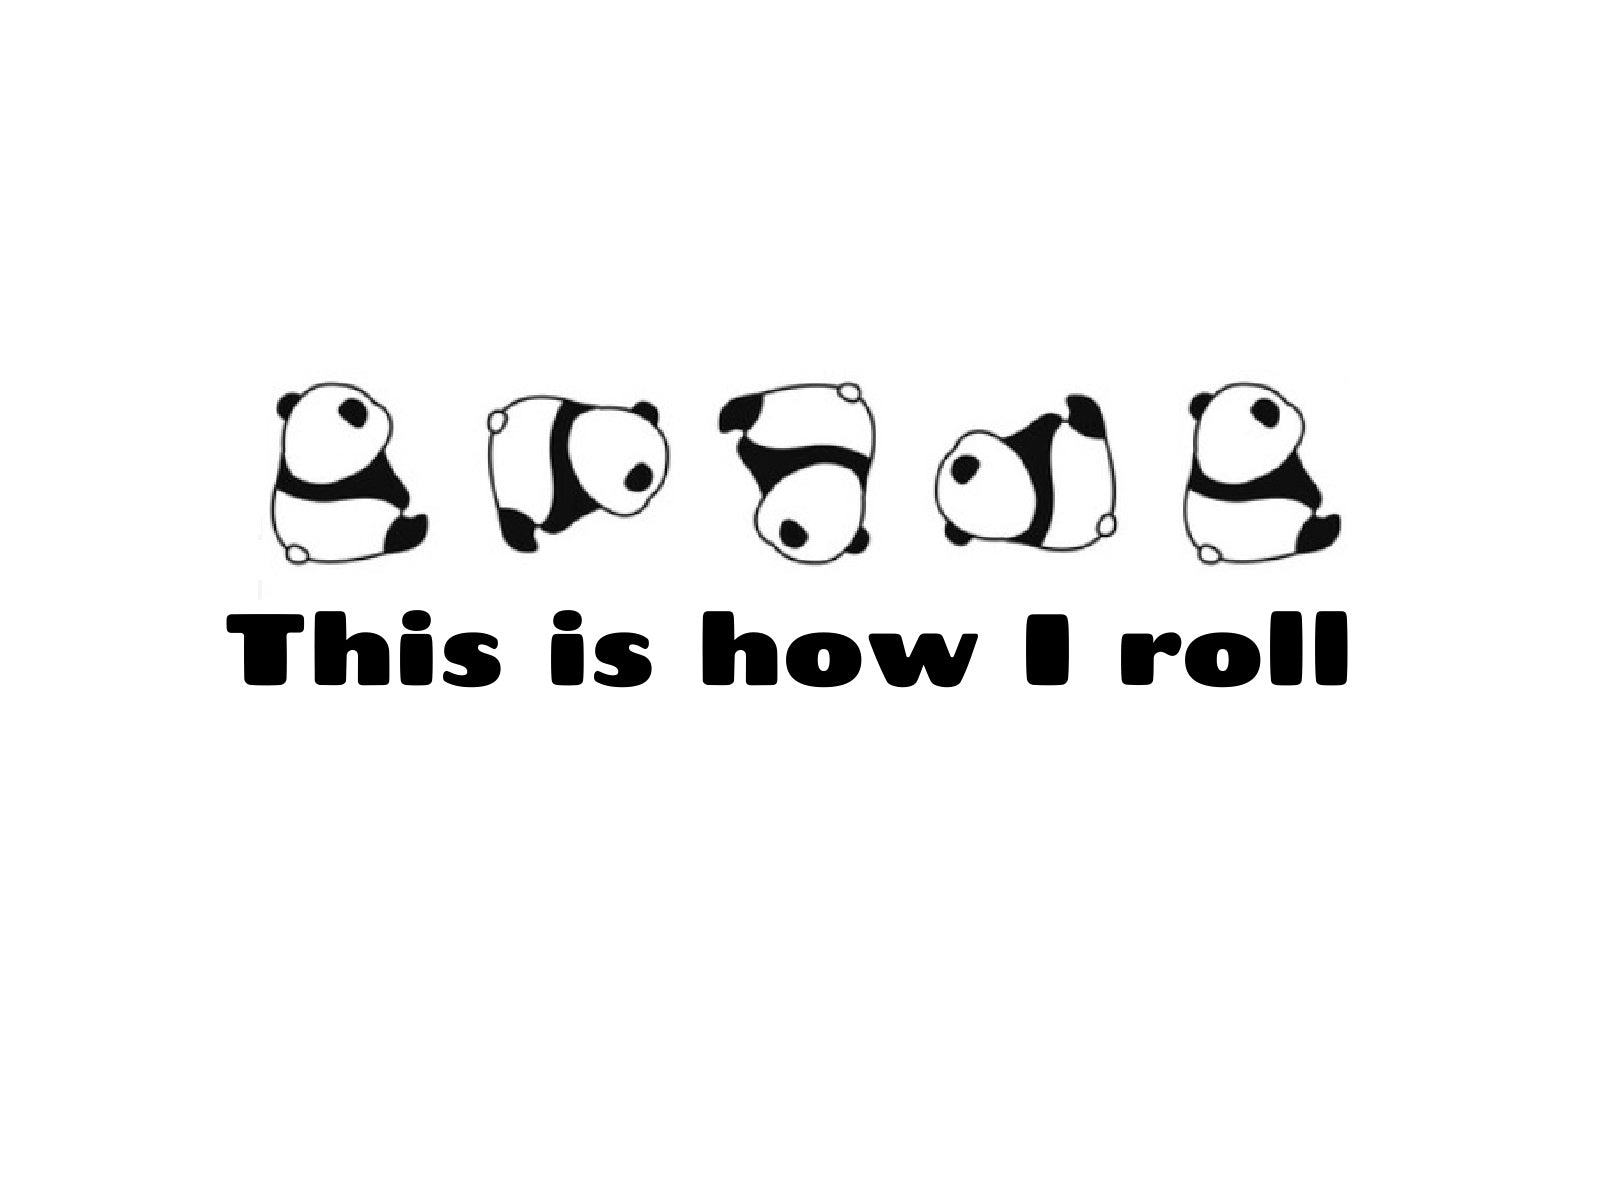 This is how I roll